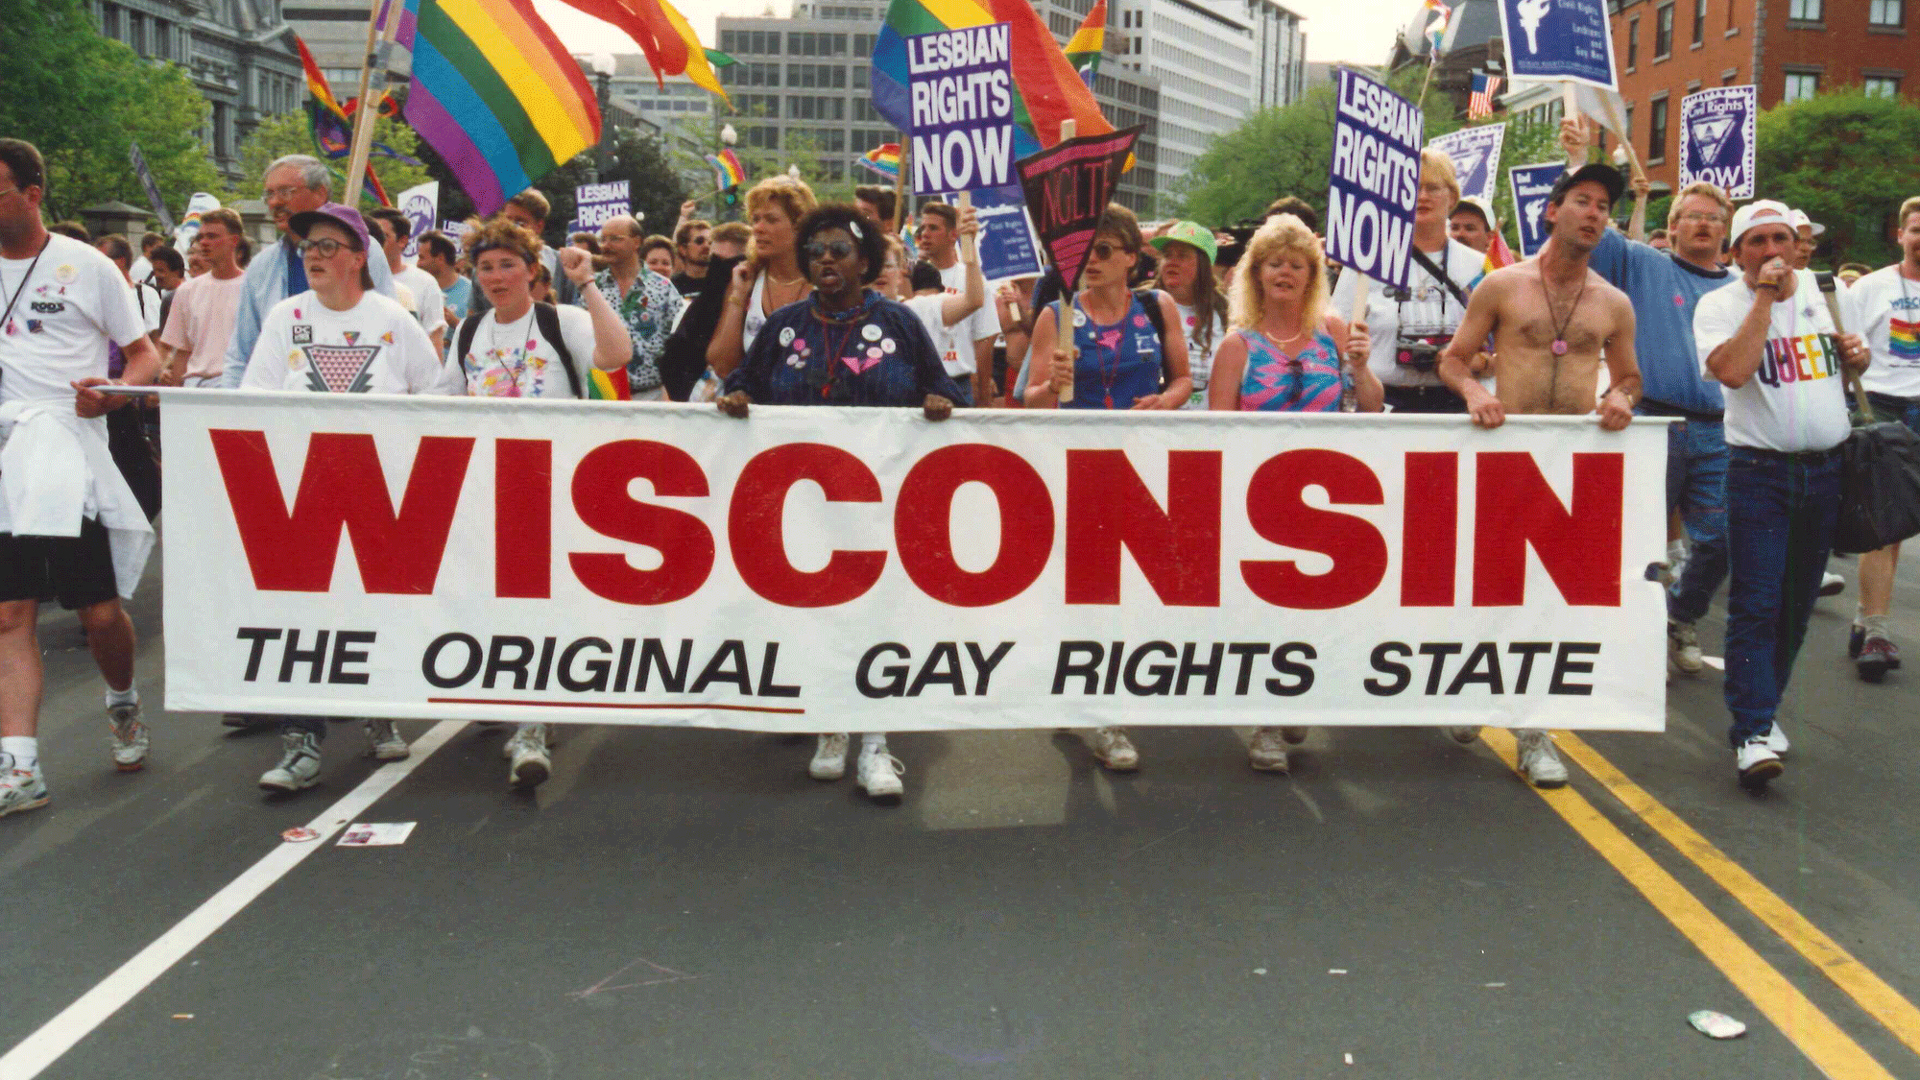 A gay rights pride march in 1982, a large group of people lead with a banner reading "WISCONSIN, the original gay rights state" followed by rainbow Pride flags and LGBTQ+ rights signs.